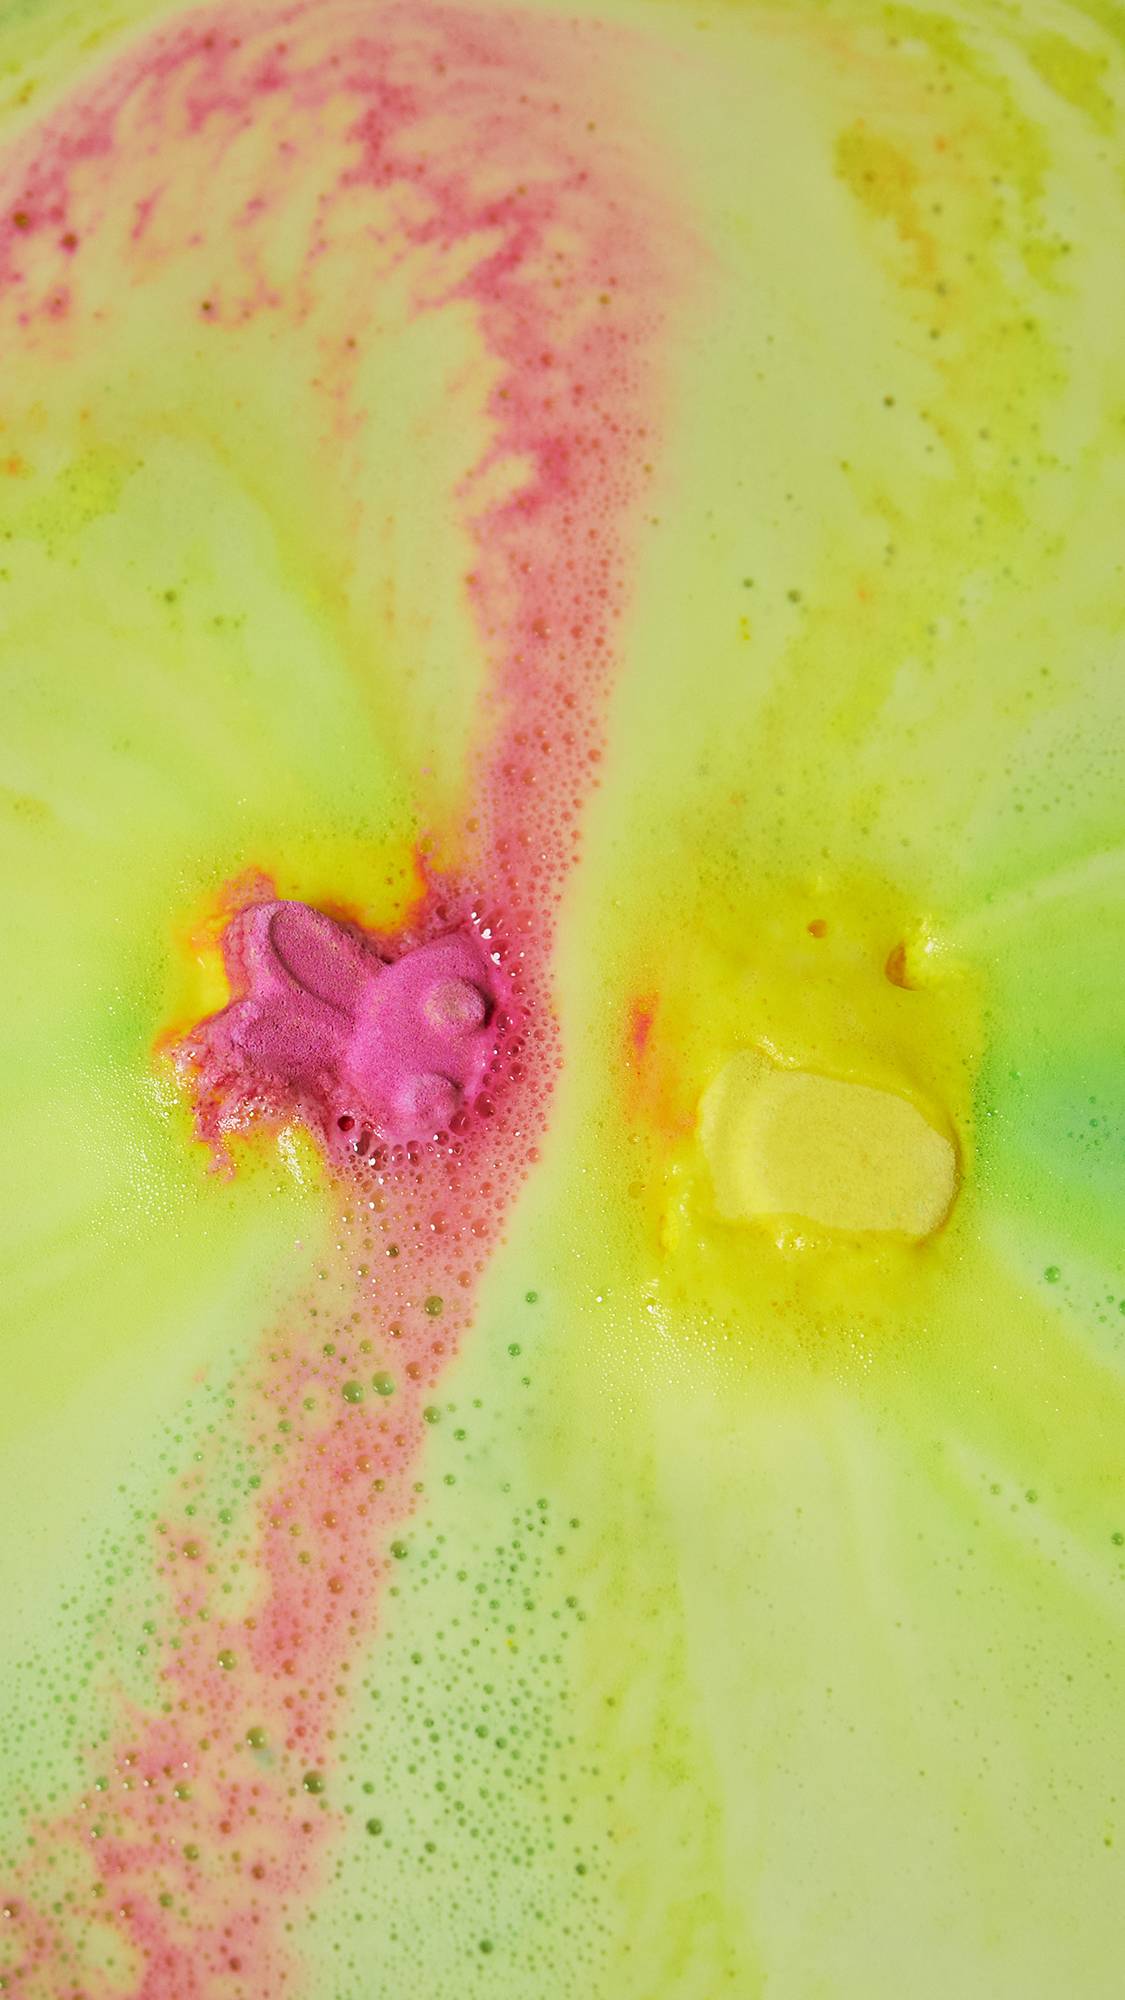 The bath bomb has mostly dissolved leaving a sea of velvety pink, yellow and green foam. Part of the pink bunny face is still visible through the foam.